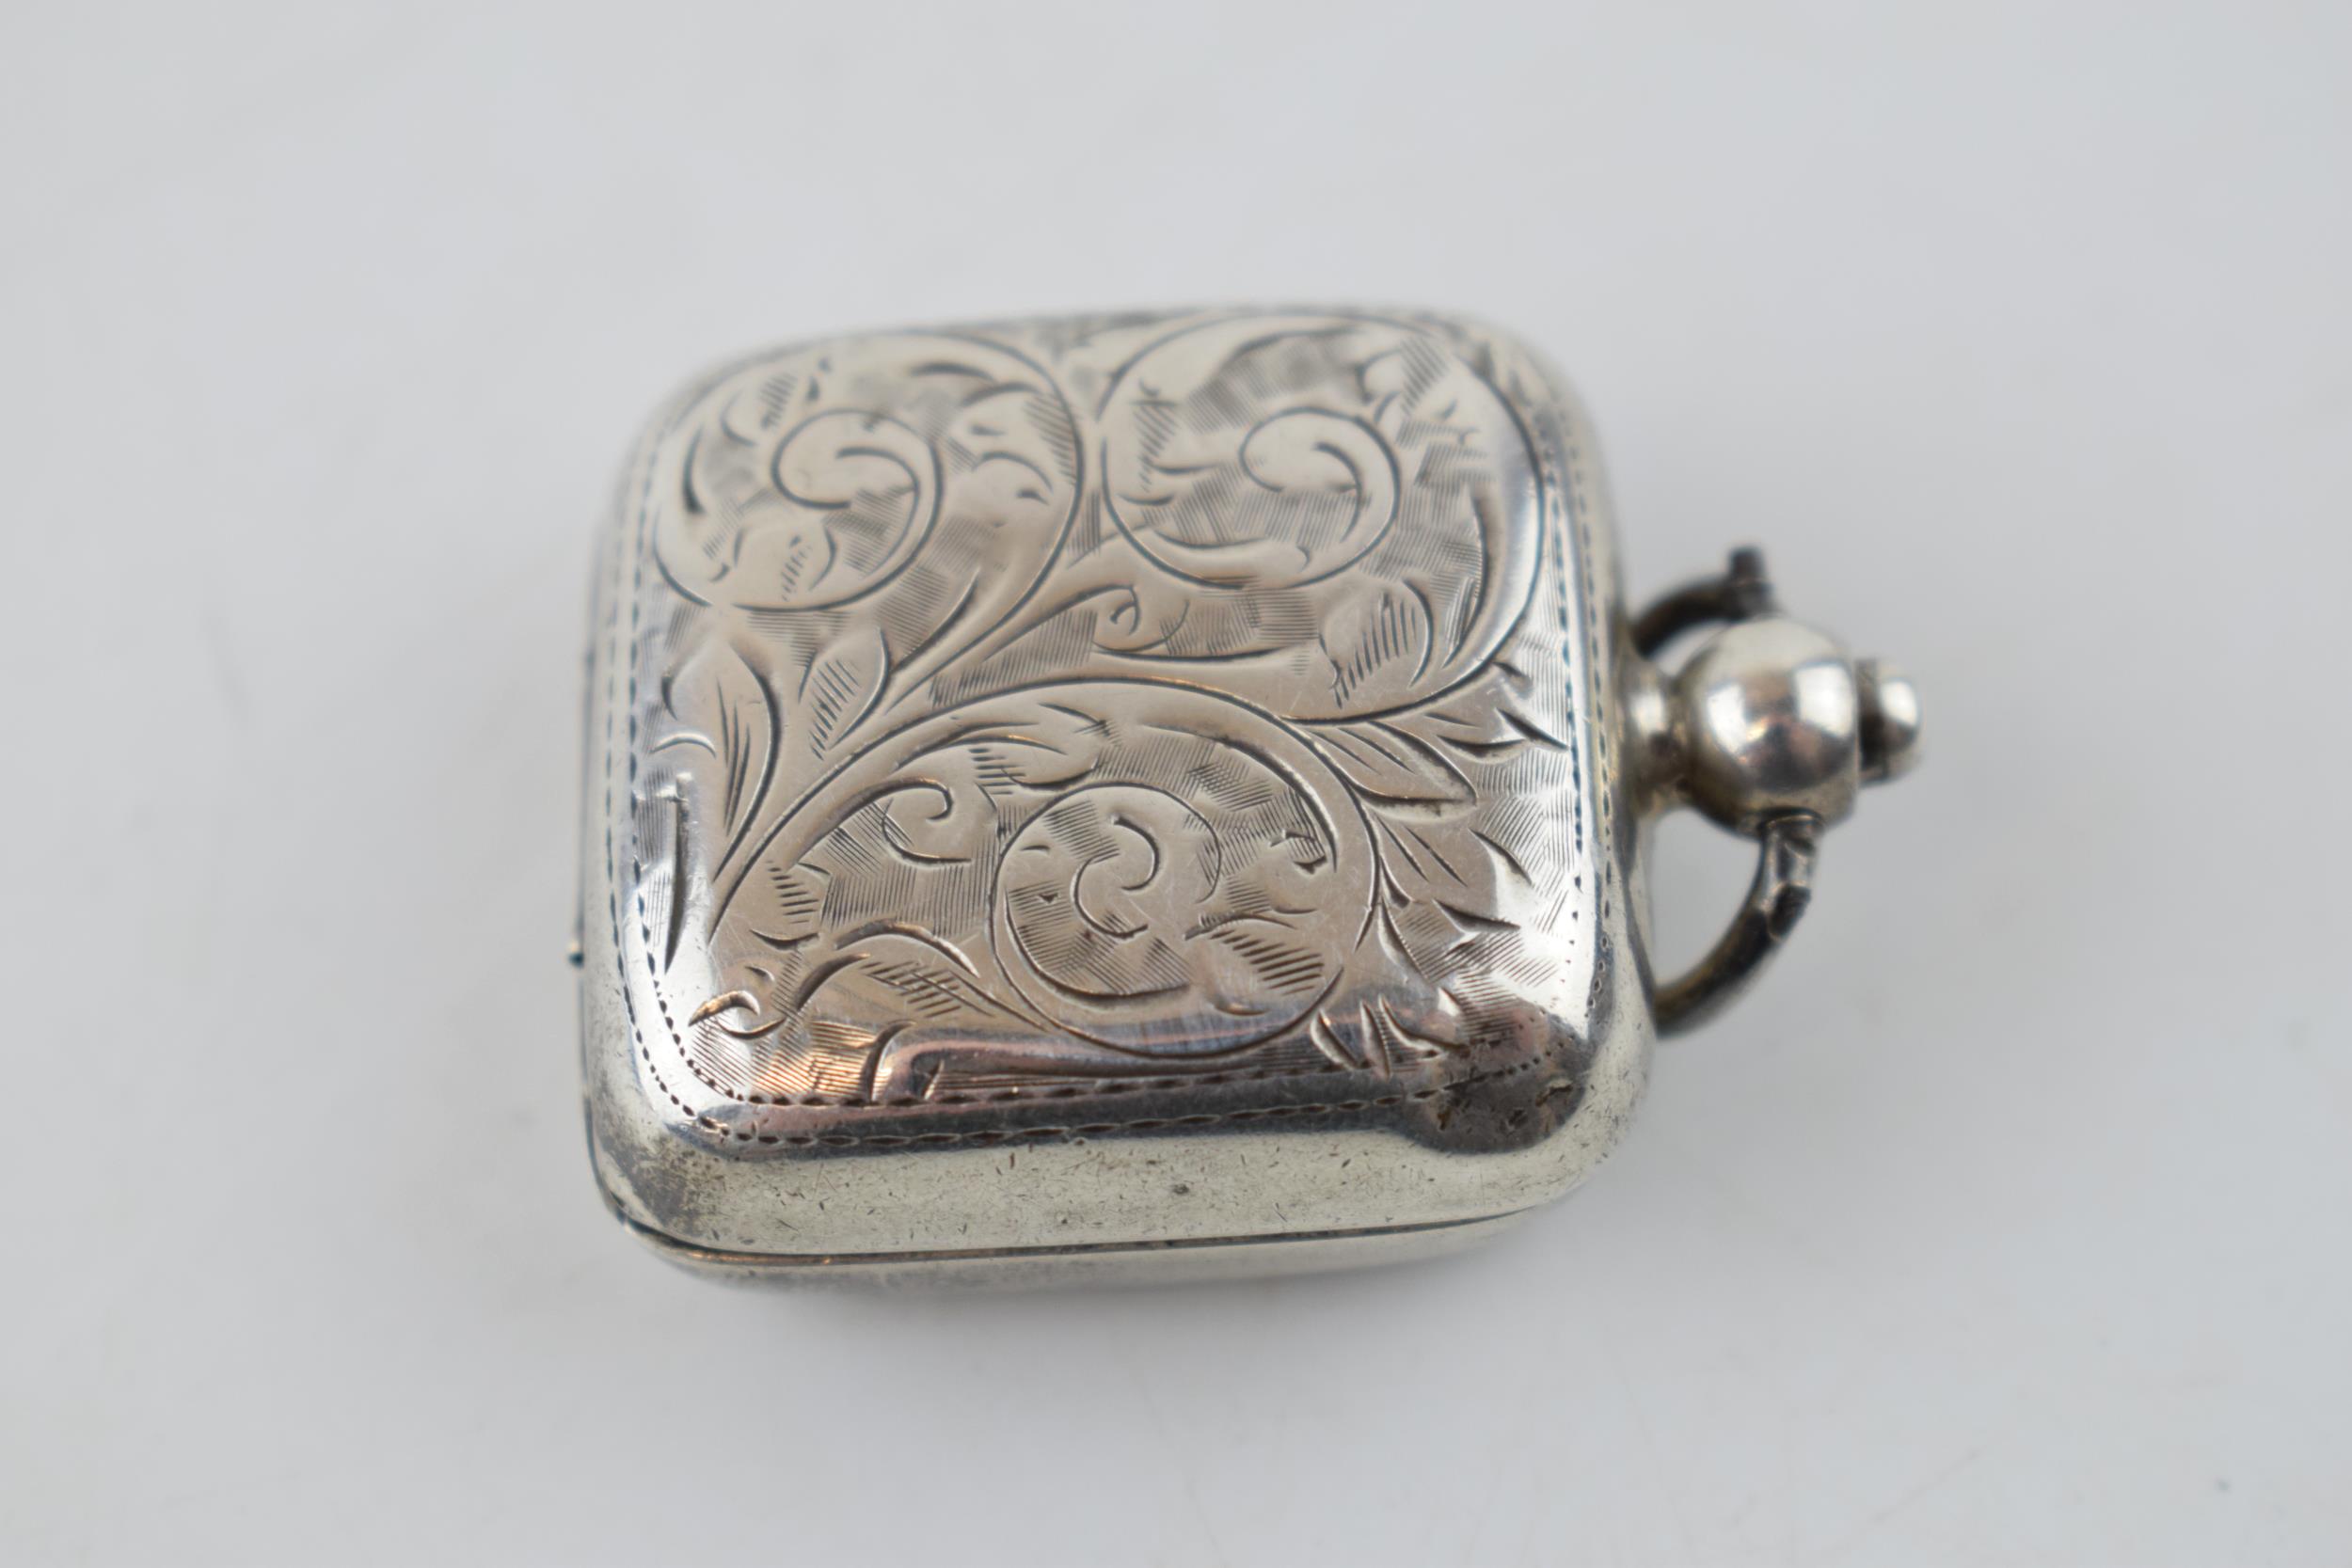 Silver sovereign case, Birmingham 1913, working action. - Image 2 of 3